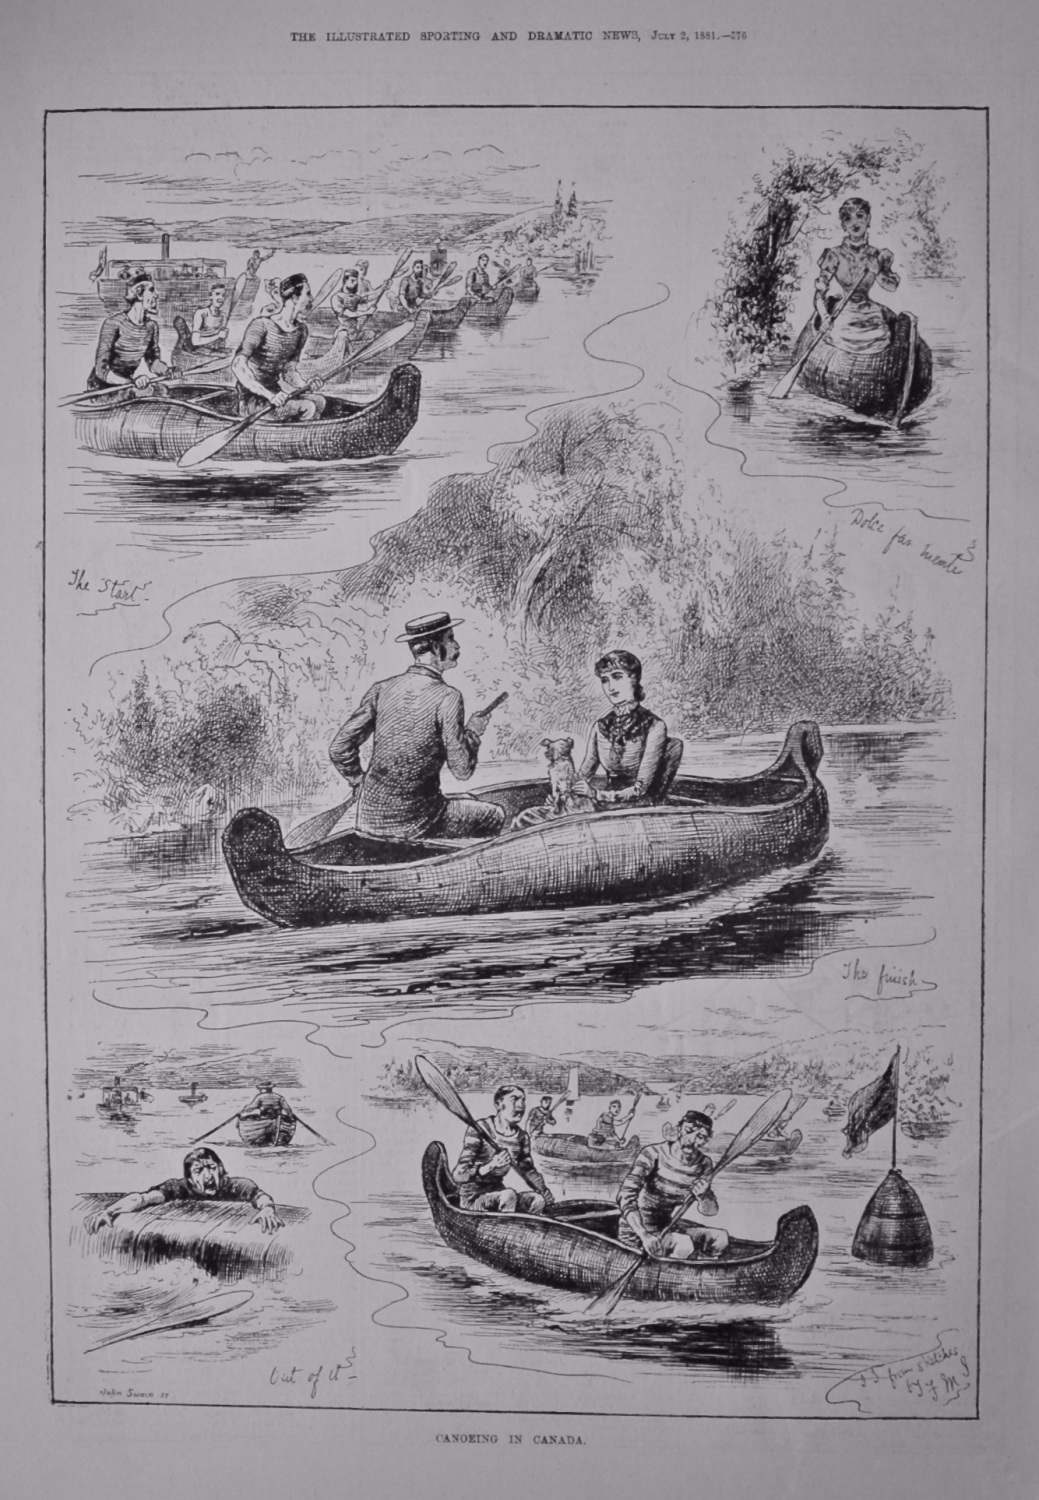 Canoeing in Canada.  1881.